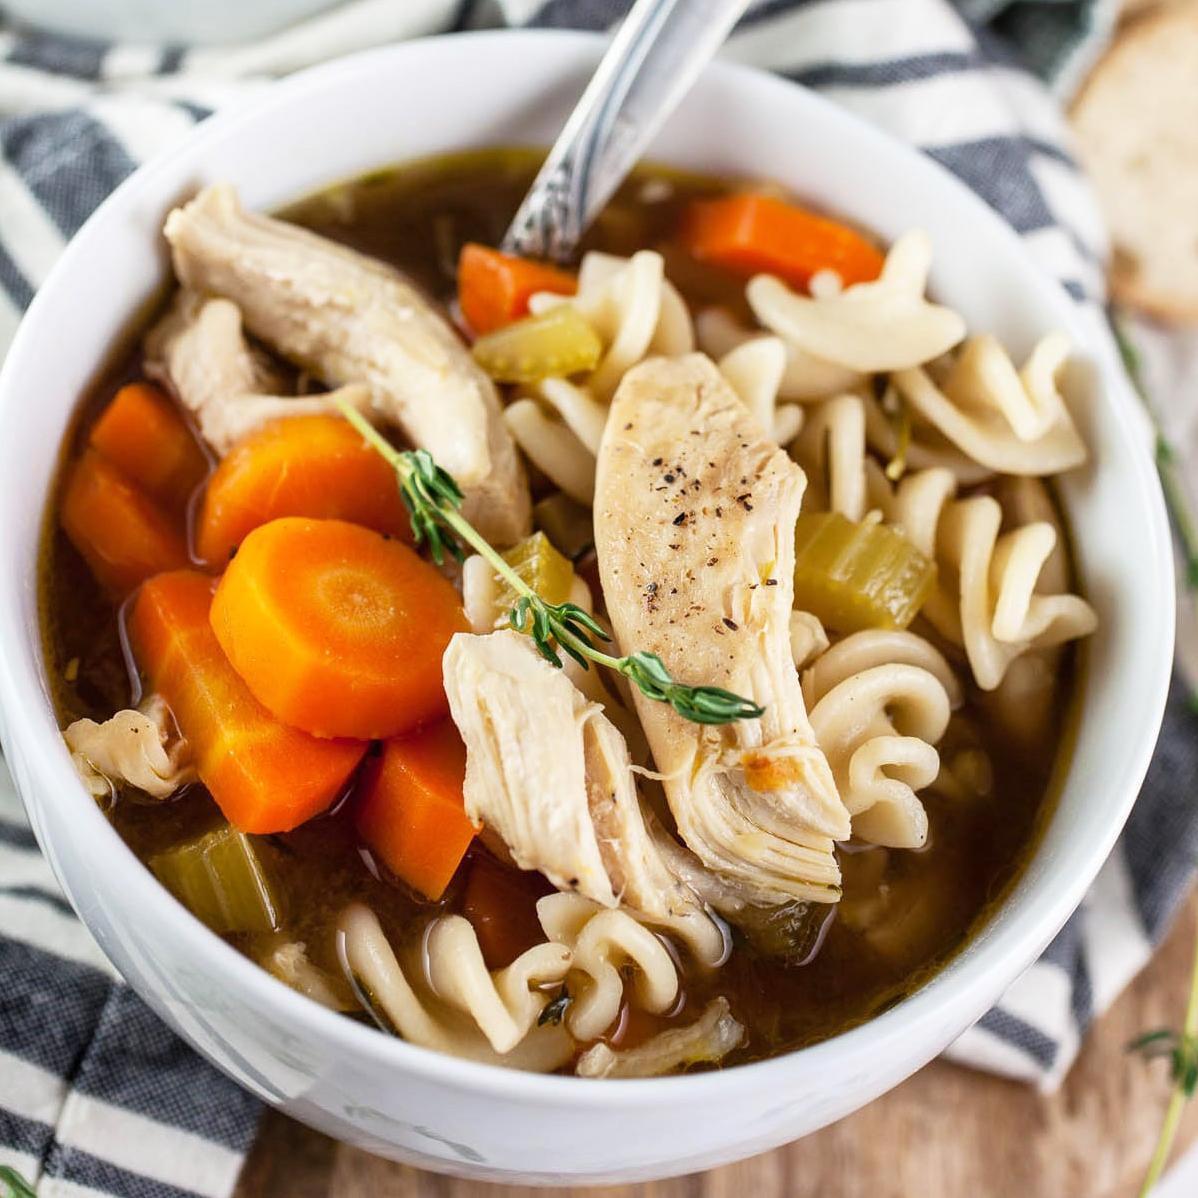  Comfort food with a healthy twist: Old Fashioned gluten-free chicken noodle soup